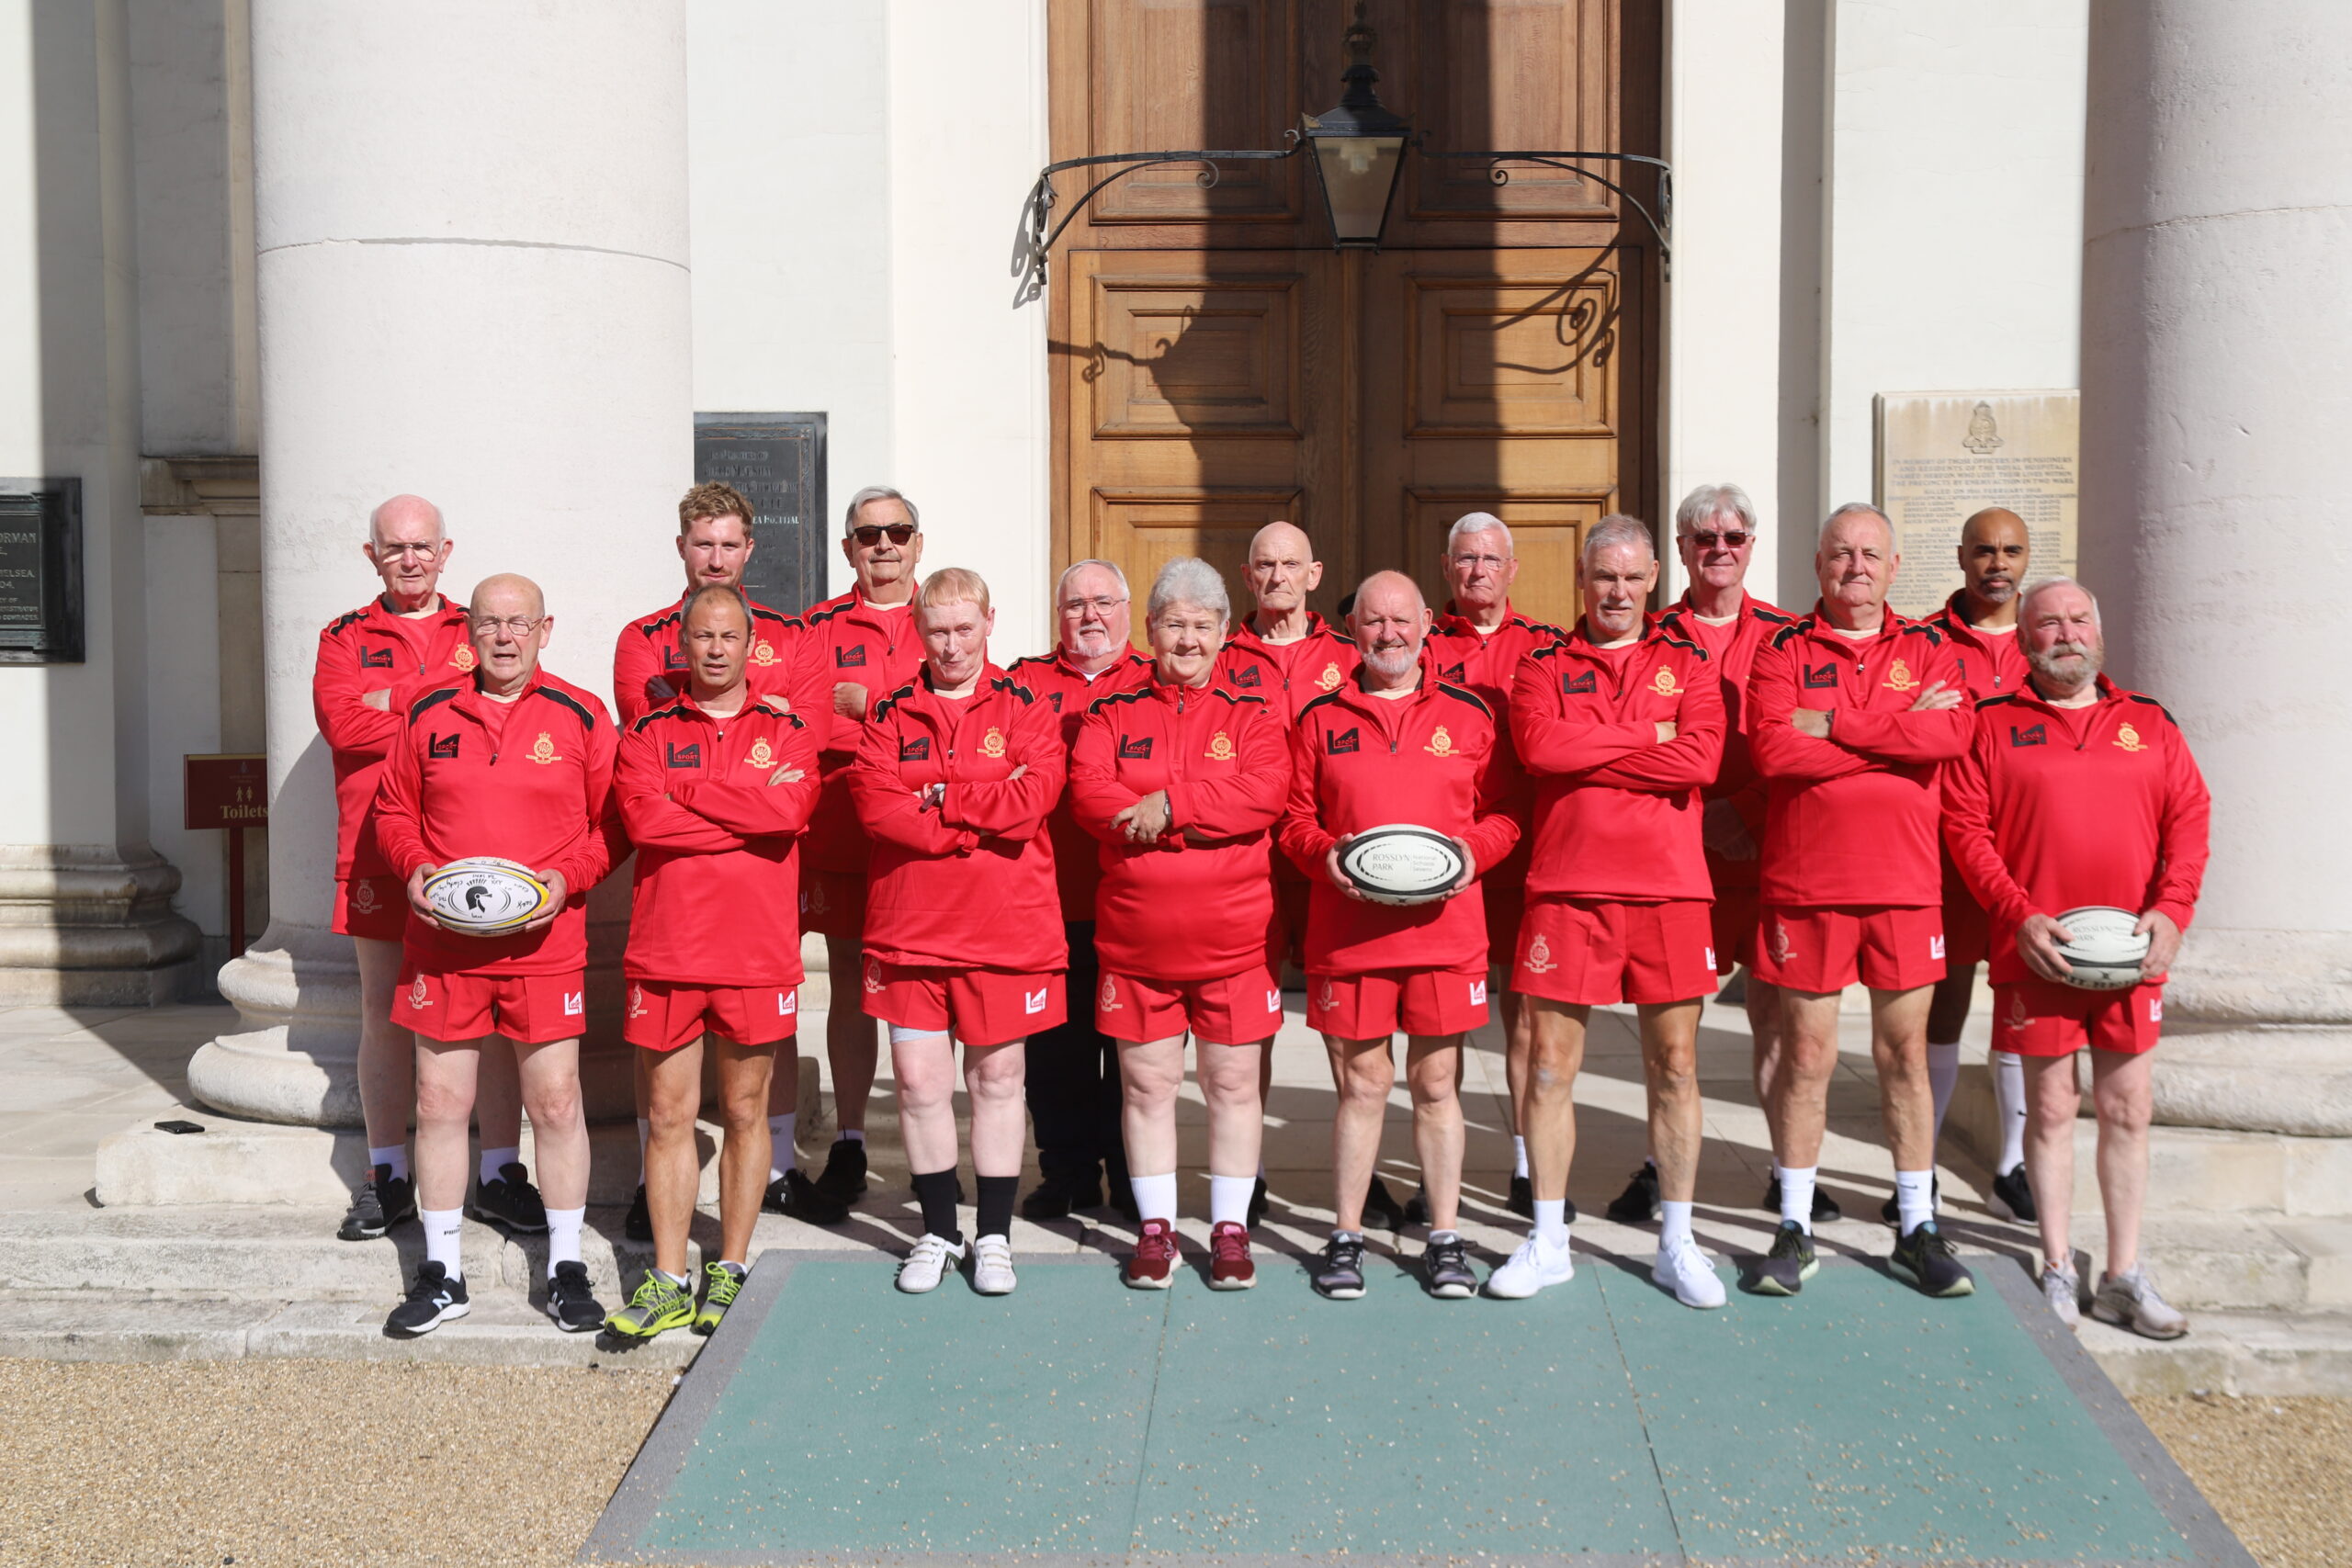 Chelsea Pensioners and Scarlet Warriors